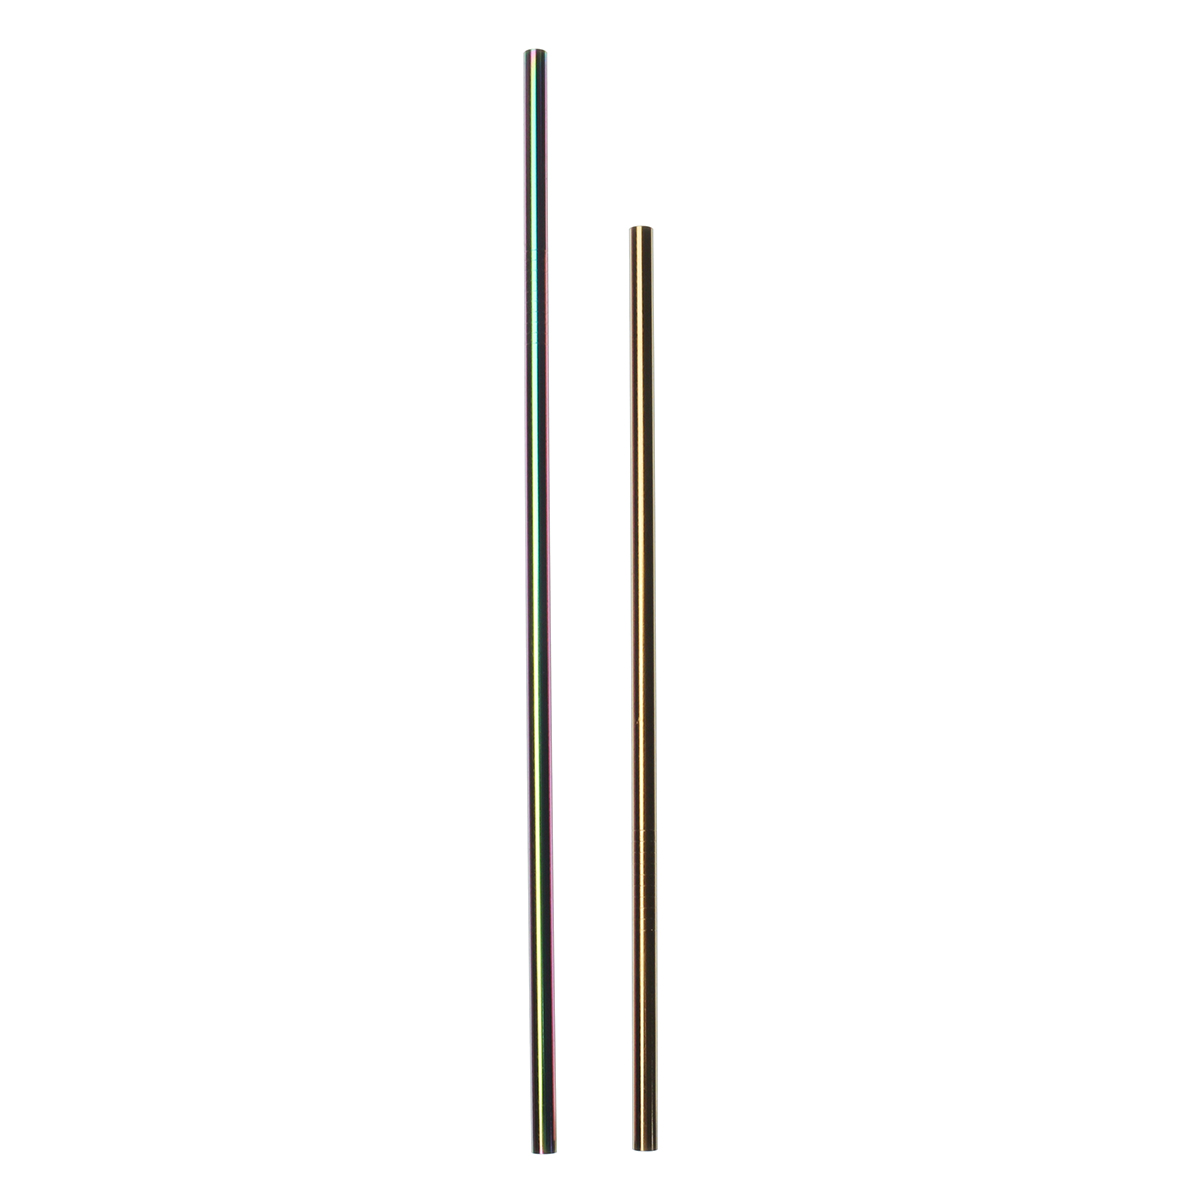 Stainless-Steel-Straw-Set-Long-Metal-Environment-Friendly-Drinking-Straws-Kit-With-2-Brushes-Bag-1311599-8